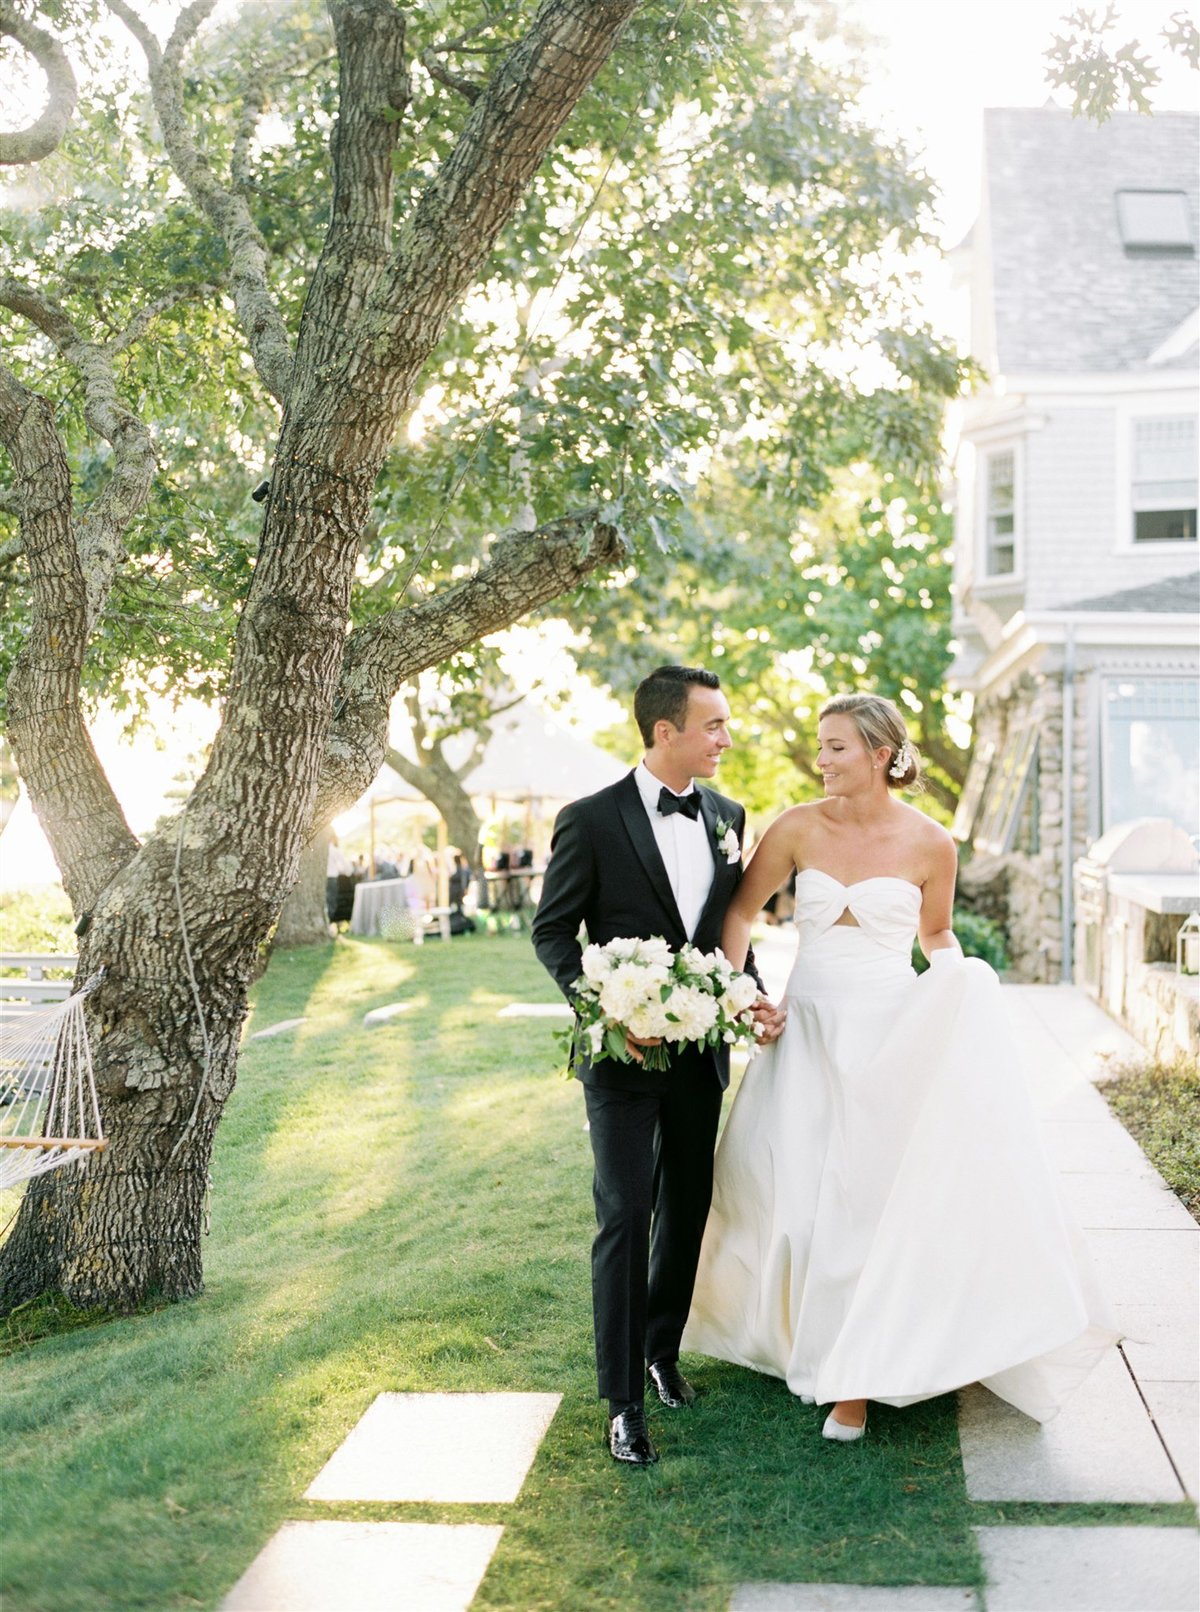 Cape Cod Tented Wedding for Tory and Ugo11